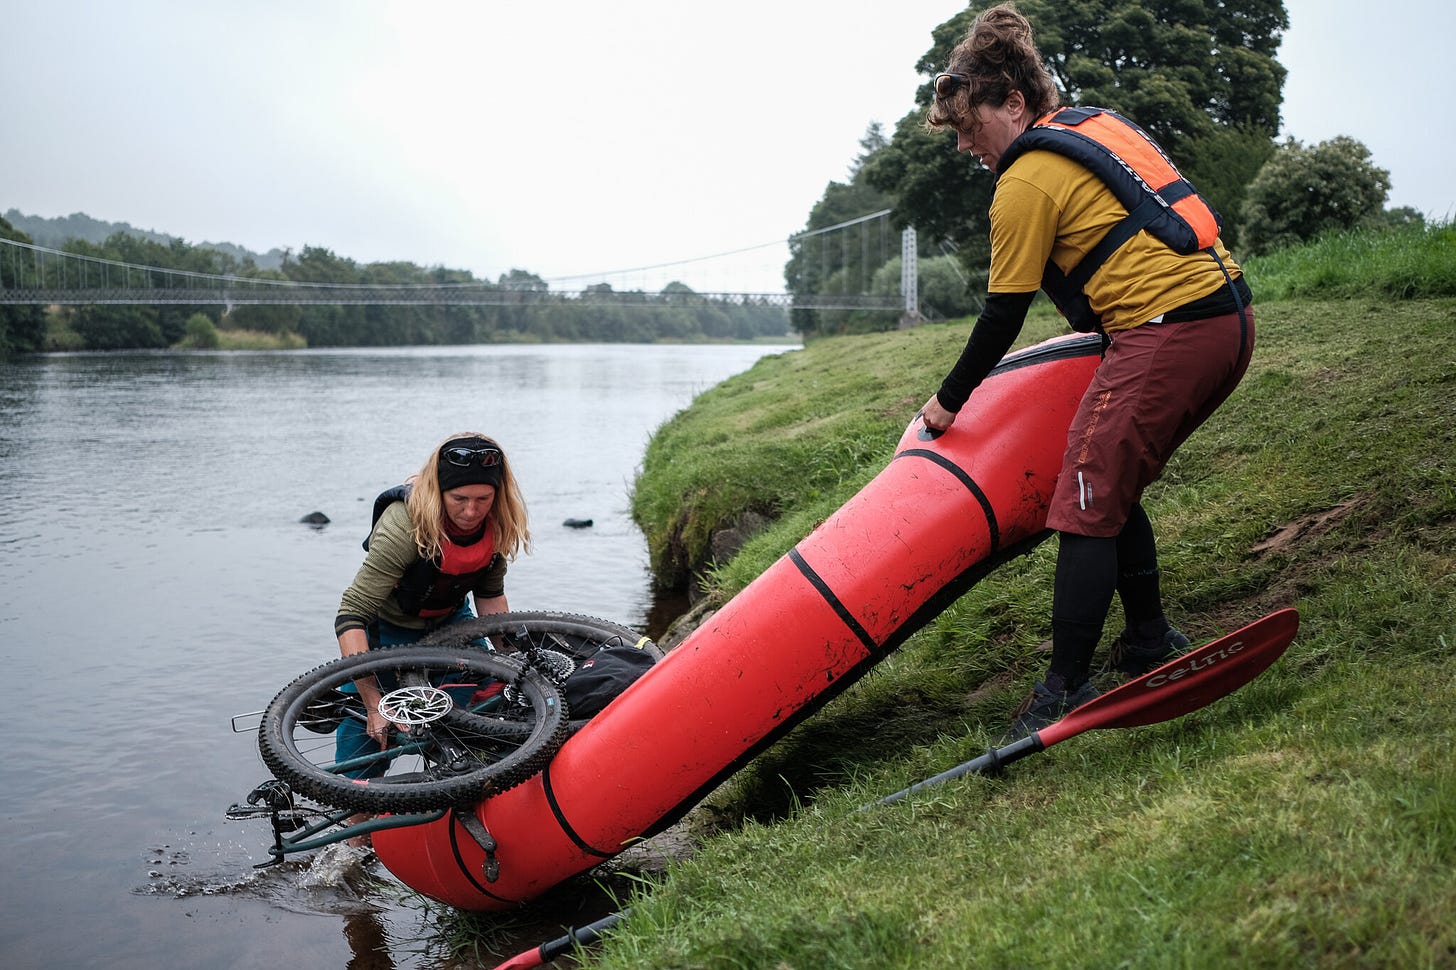 Two people loading a partially disassembled dirt bike onto a packraft.